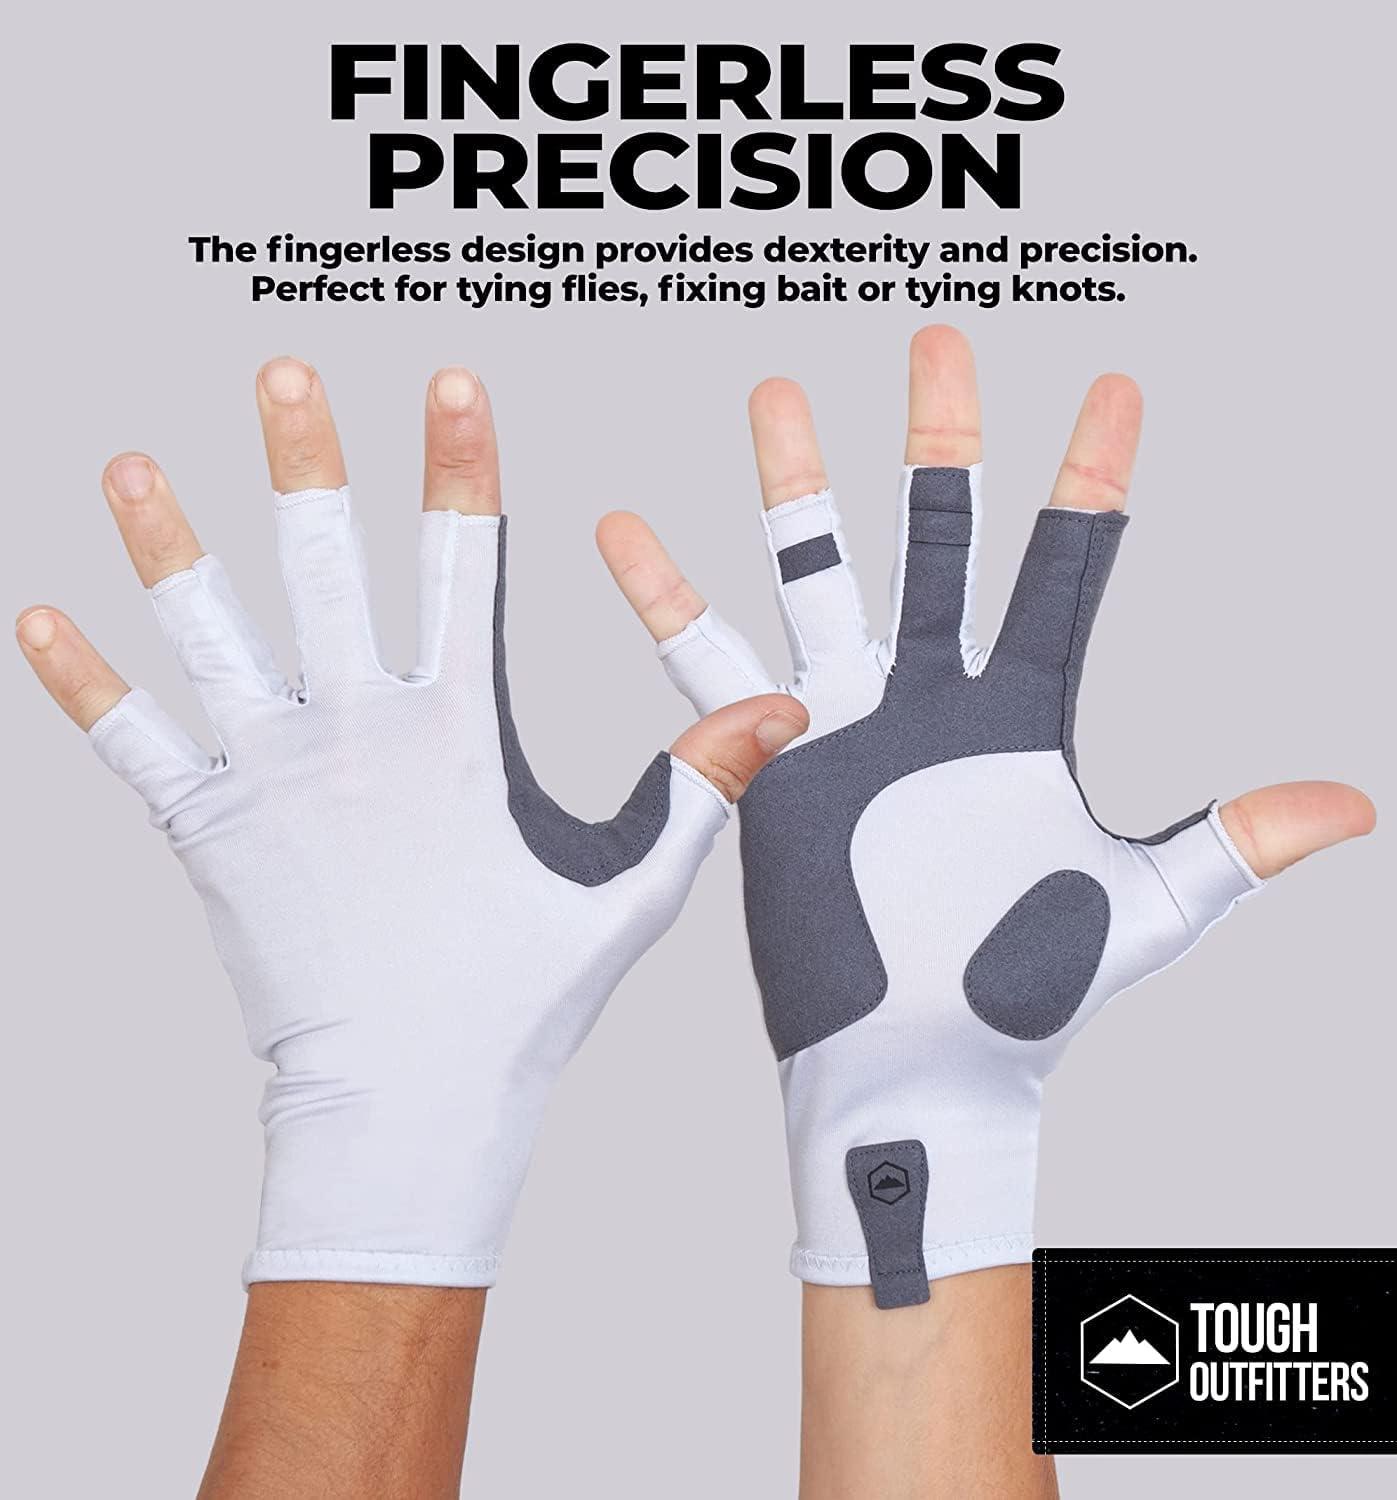 Hand Out Fish Gloves – Adventure Outfitter